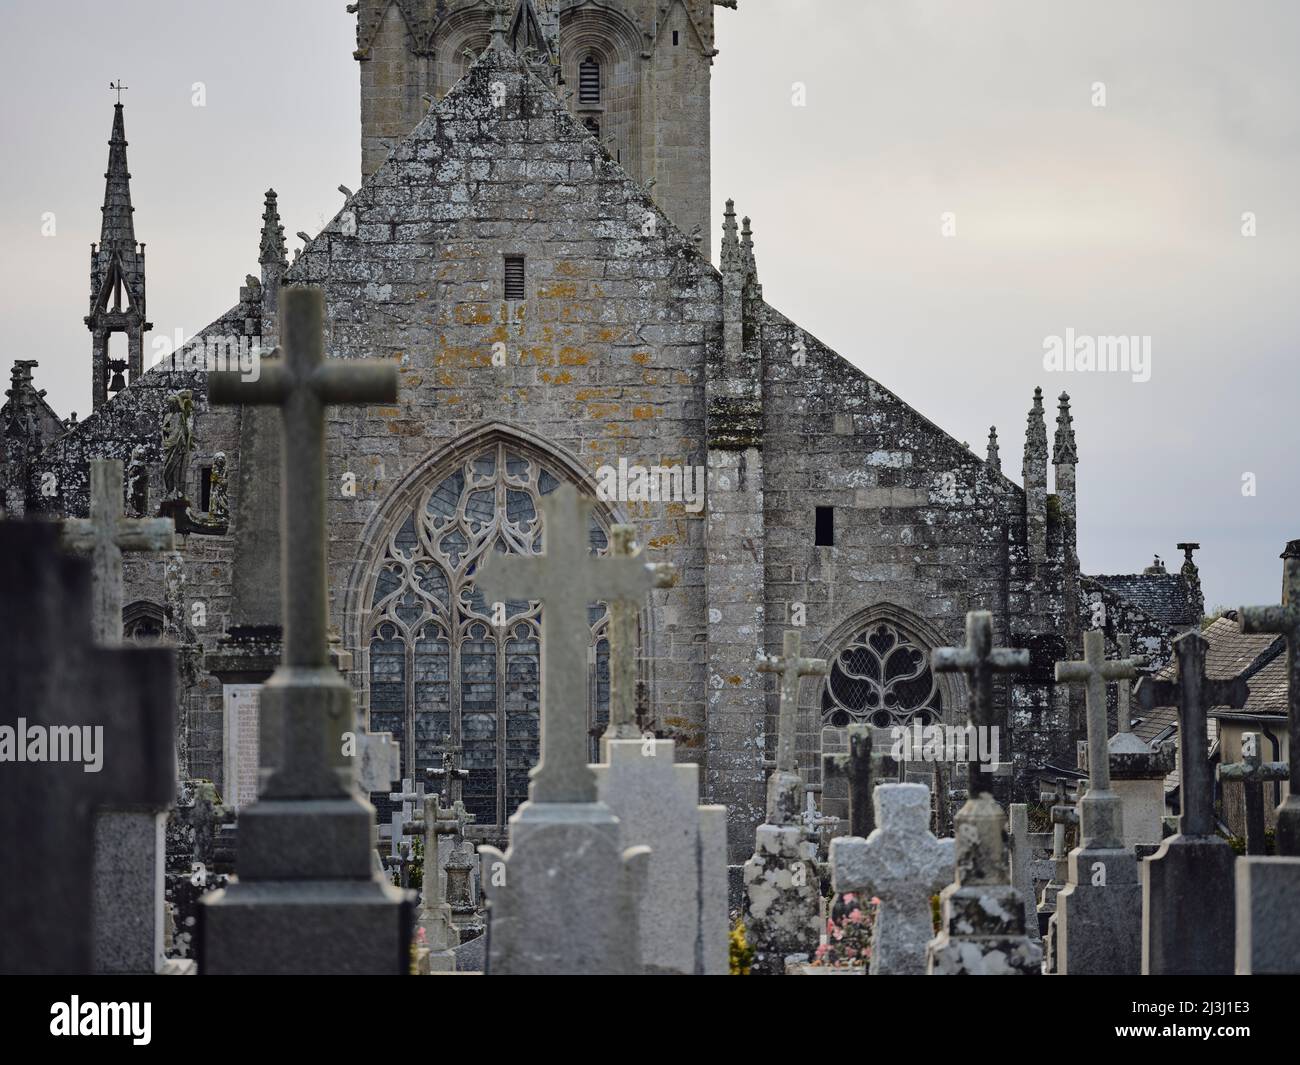 The Église Saint-Ronan and the cemetery in Locronan in the Finistère department in Brittany. Locronan's historic setting is featured in many film and television productions. Locronan is a popular destination for excursions. Stock Photo